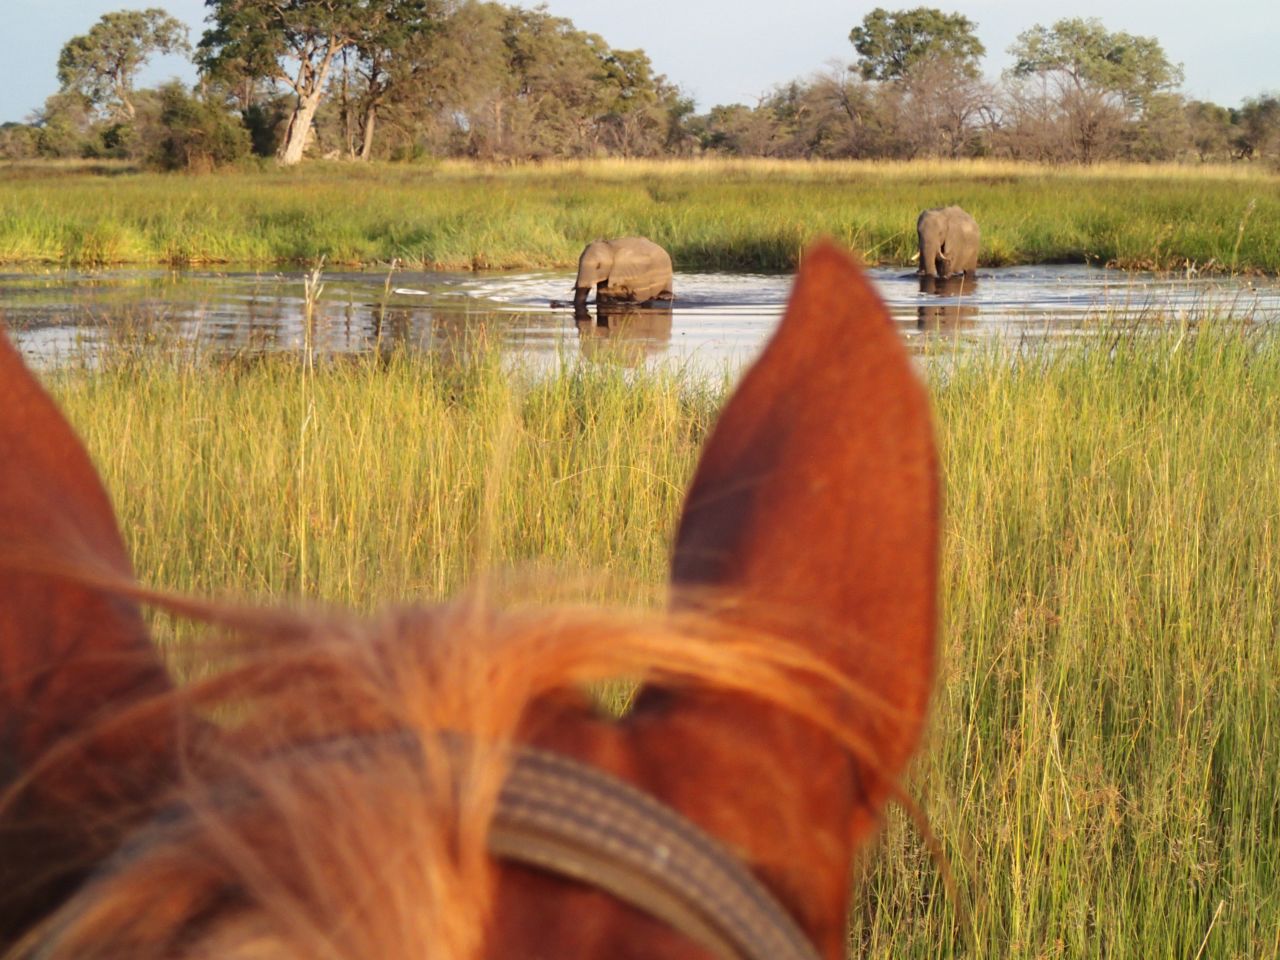 From the vantage point of the saddle, riders can expect to see elephants, lions, buffalo and antelope. 